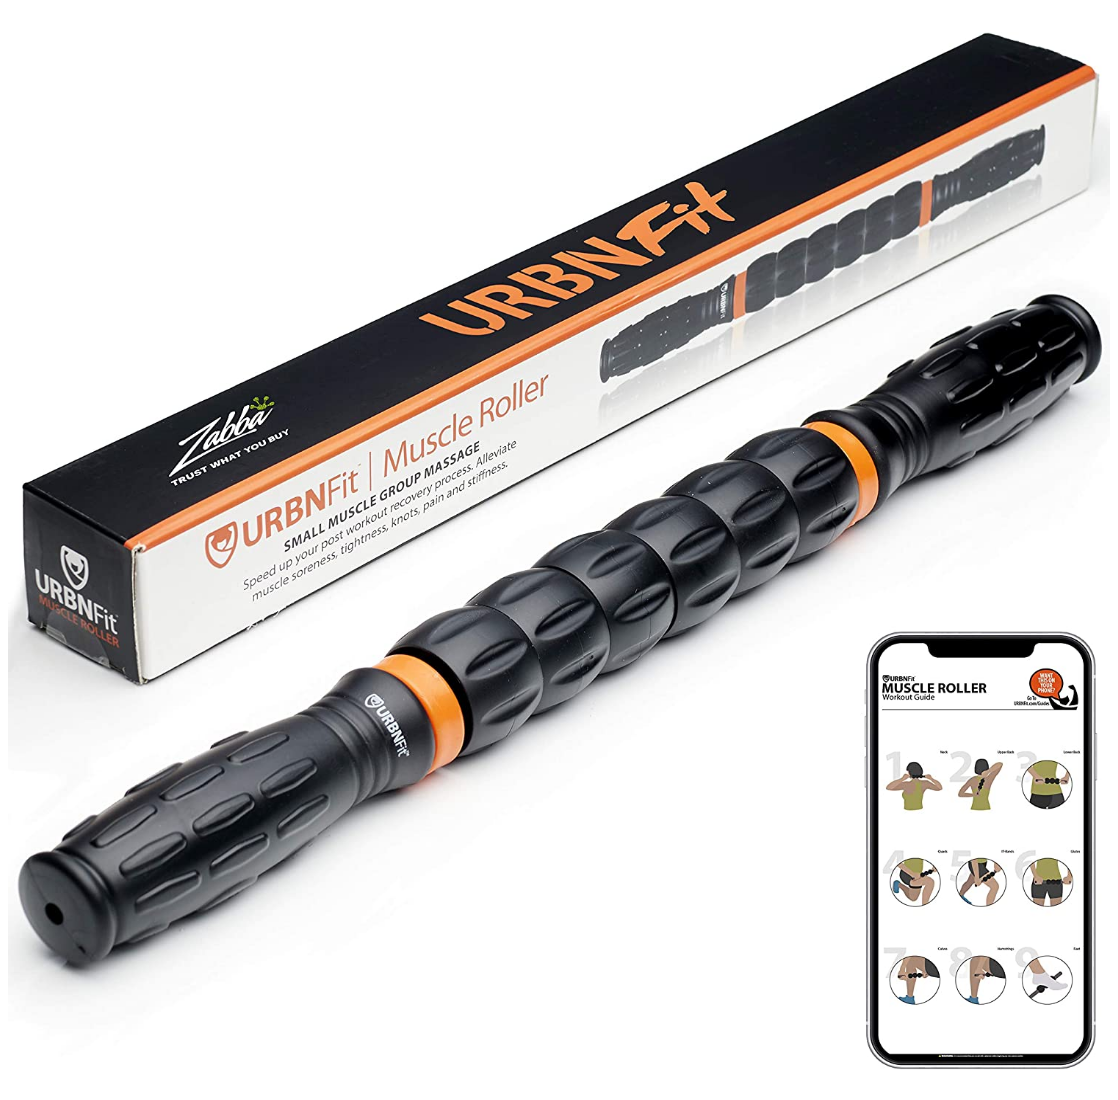 URBNFit Muscle Roller – Massage Stick for Sore Muscles Review